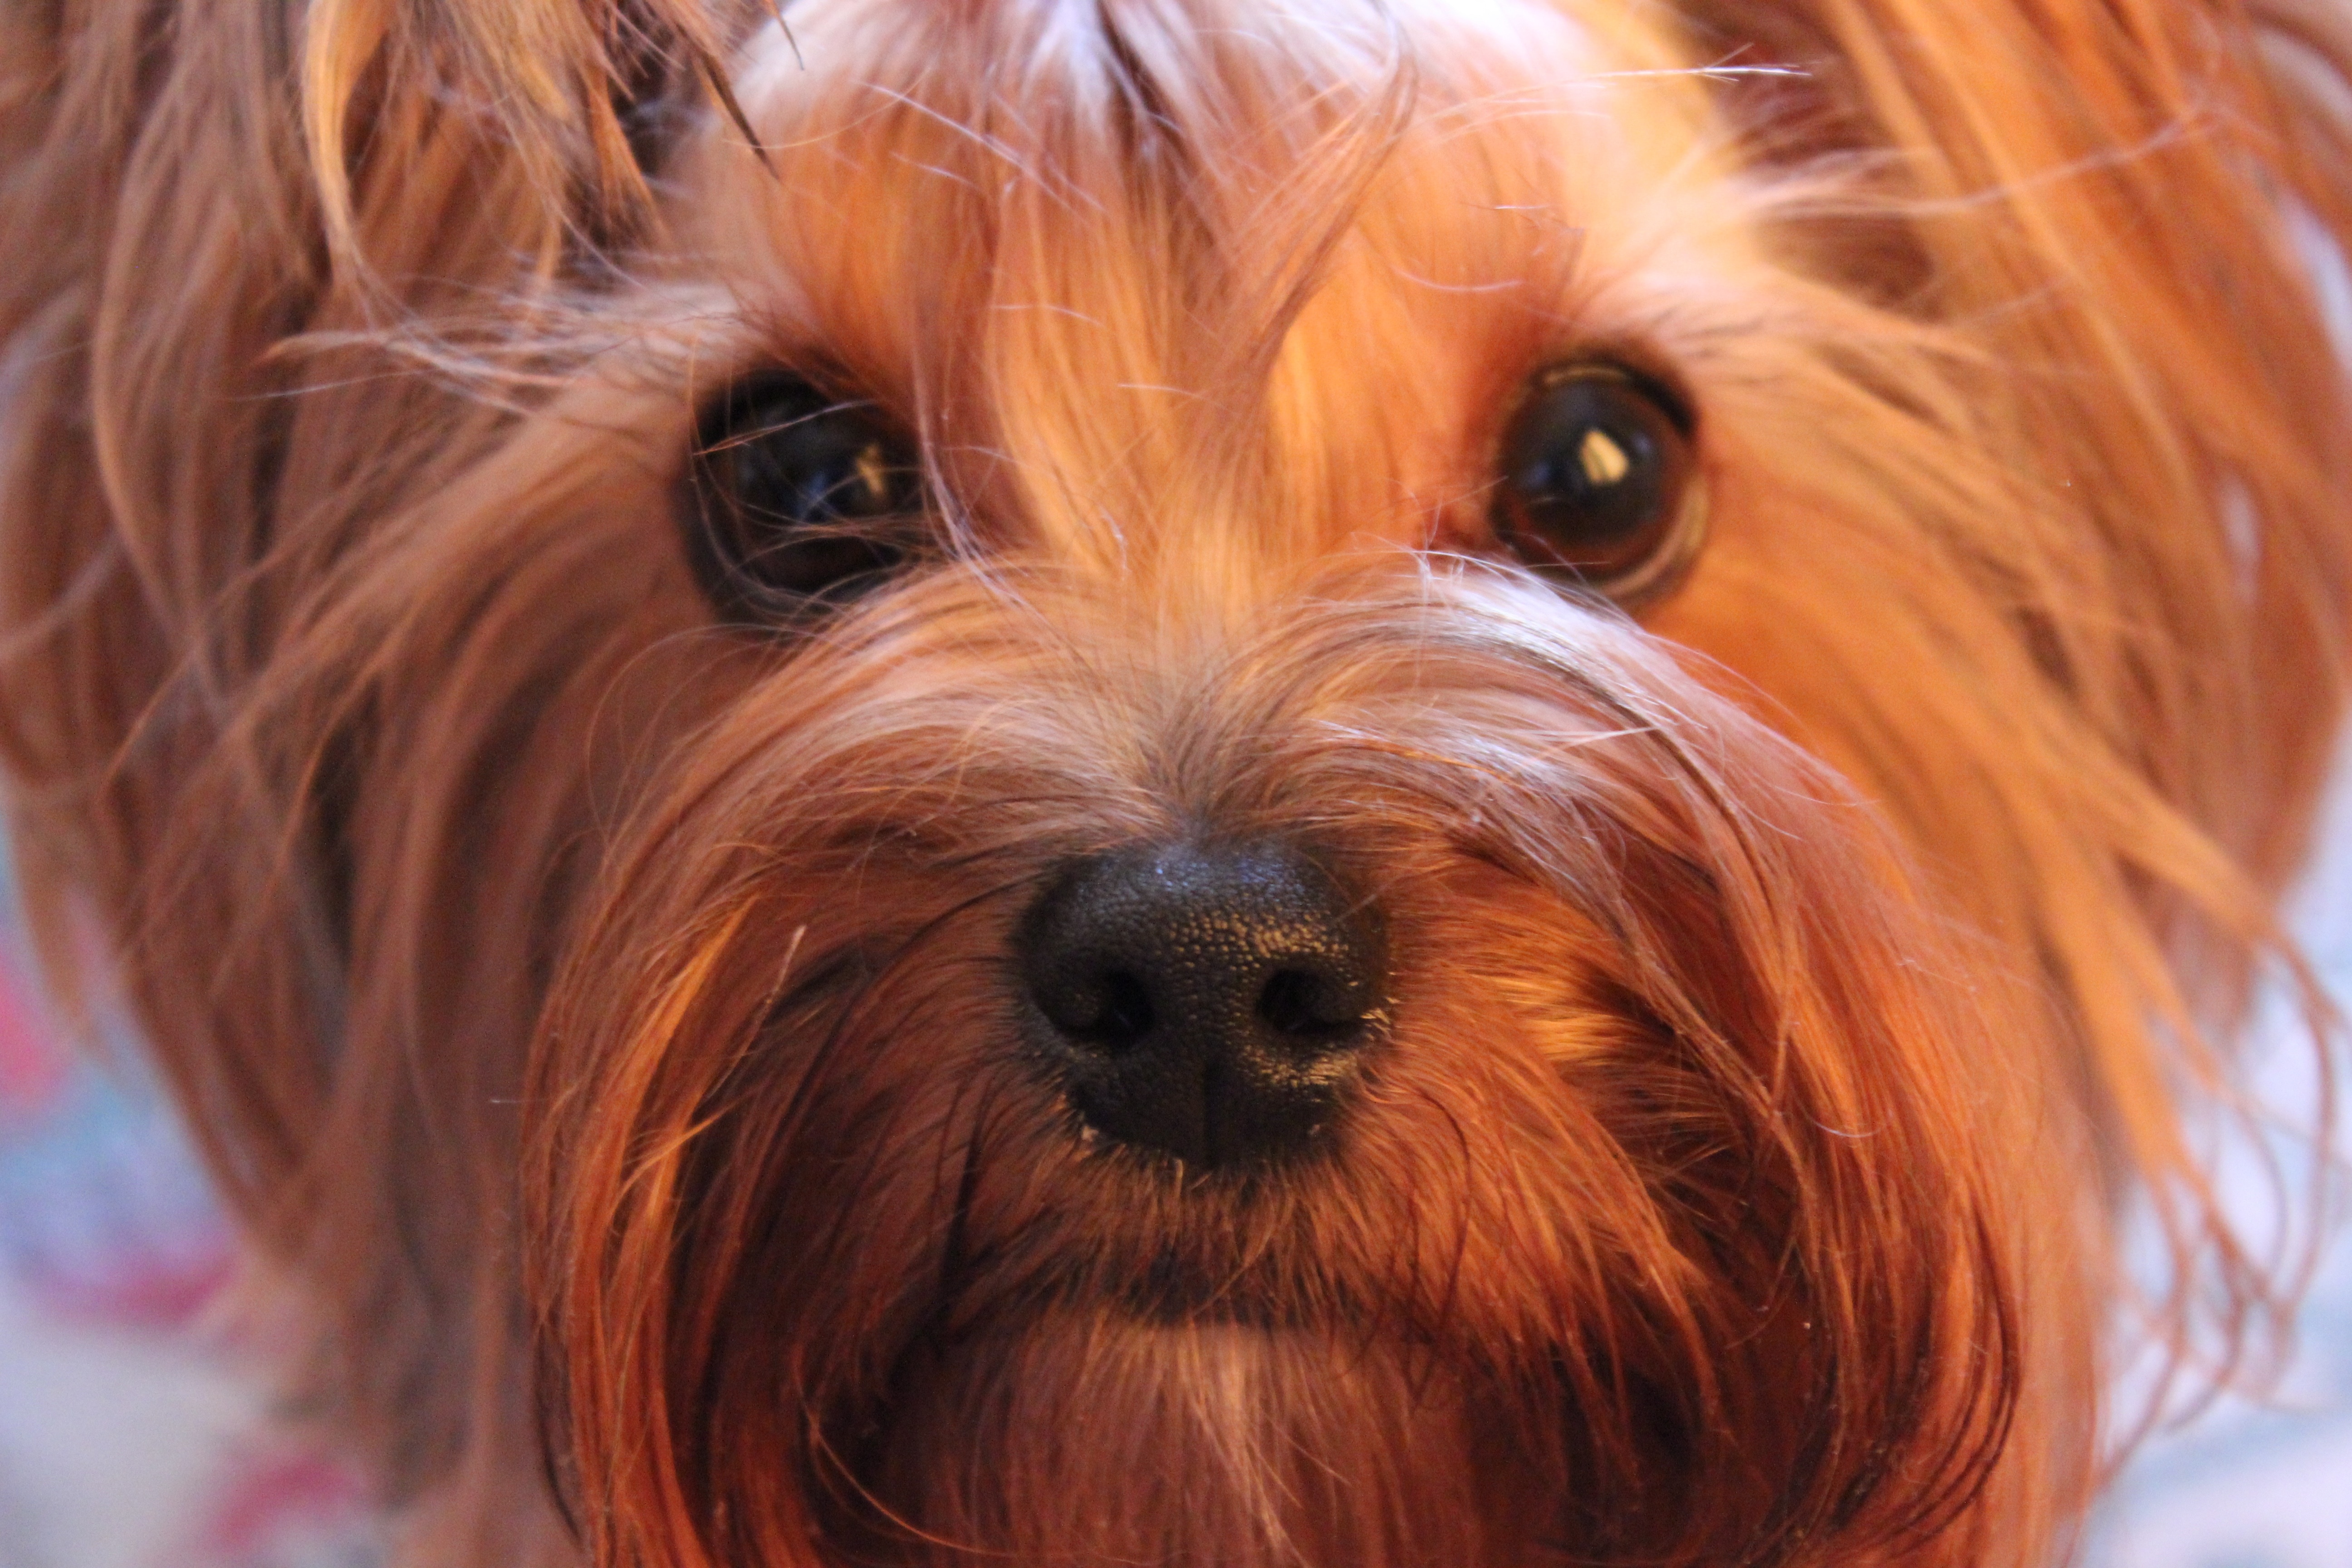 black and tan yorkshire terrier